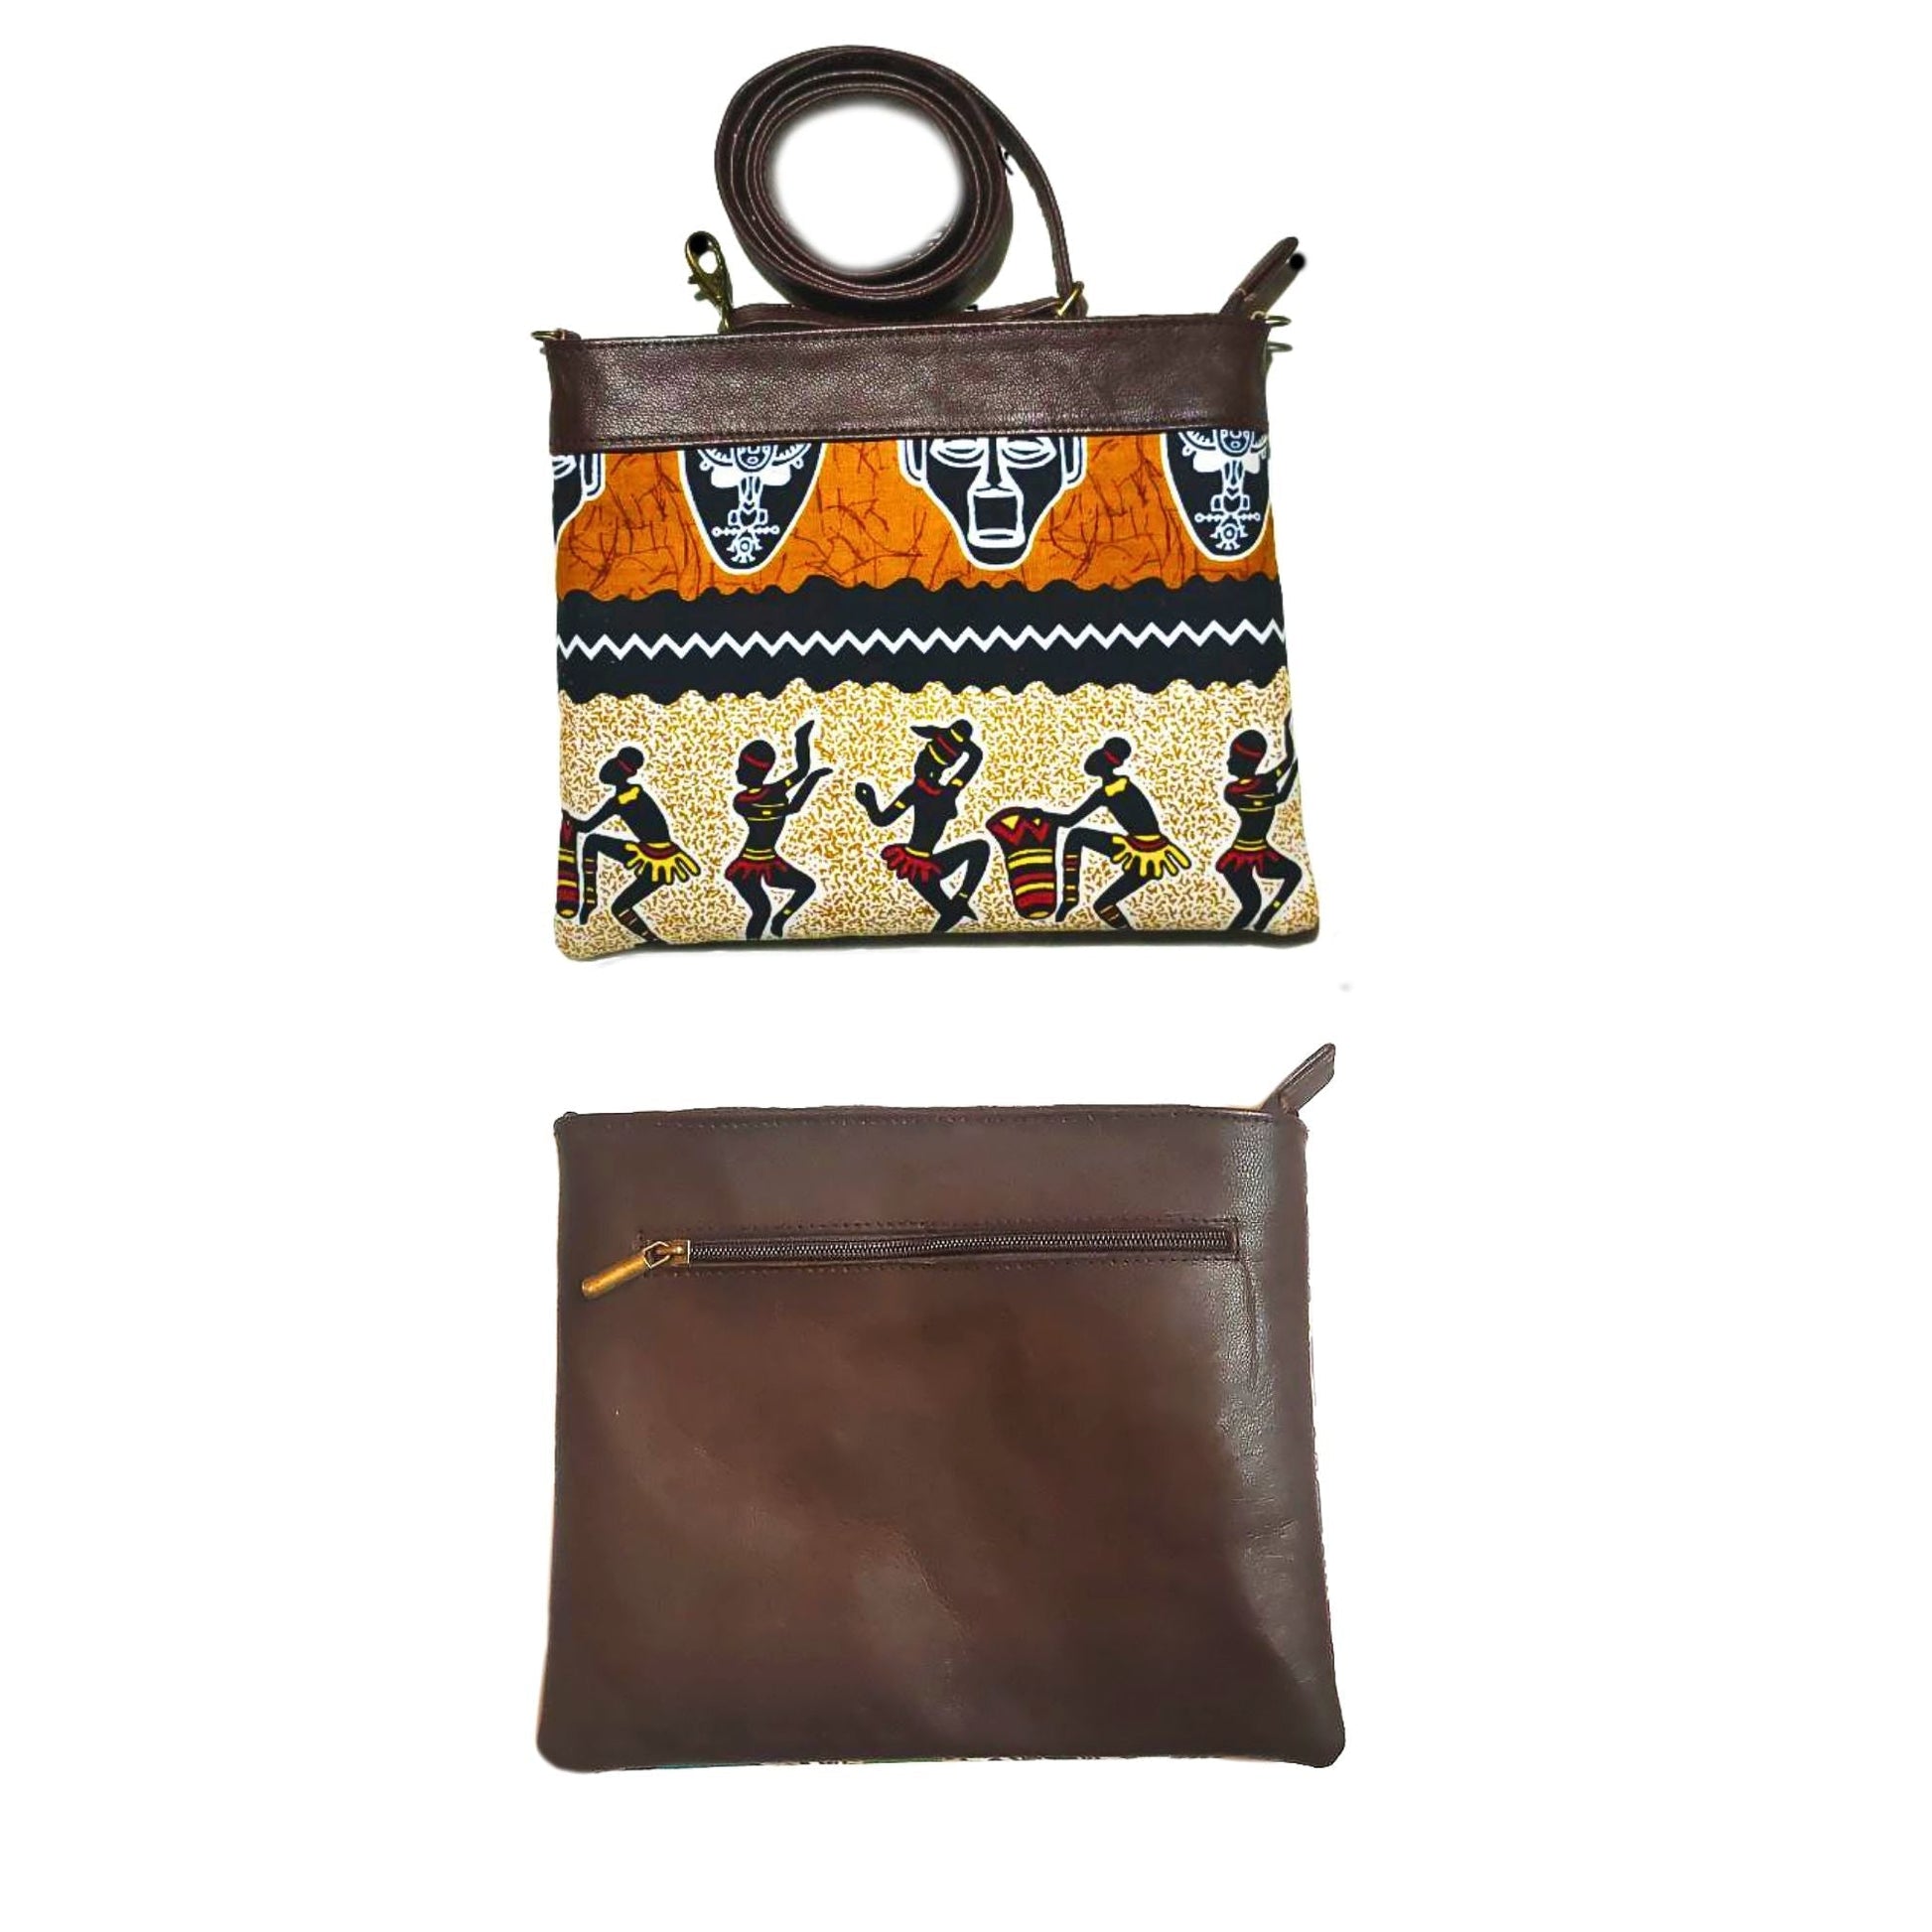 "Gnawa" Leather Duffle Bag With Matched Clutch - Trendiesty Worldwide